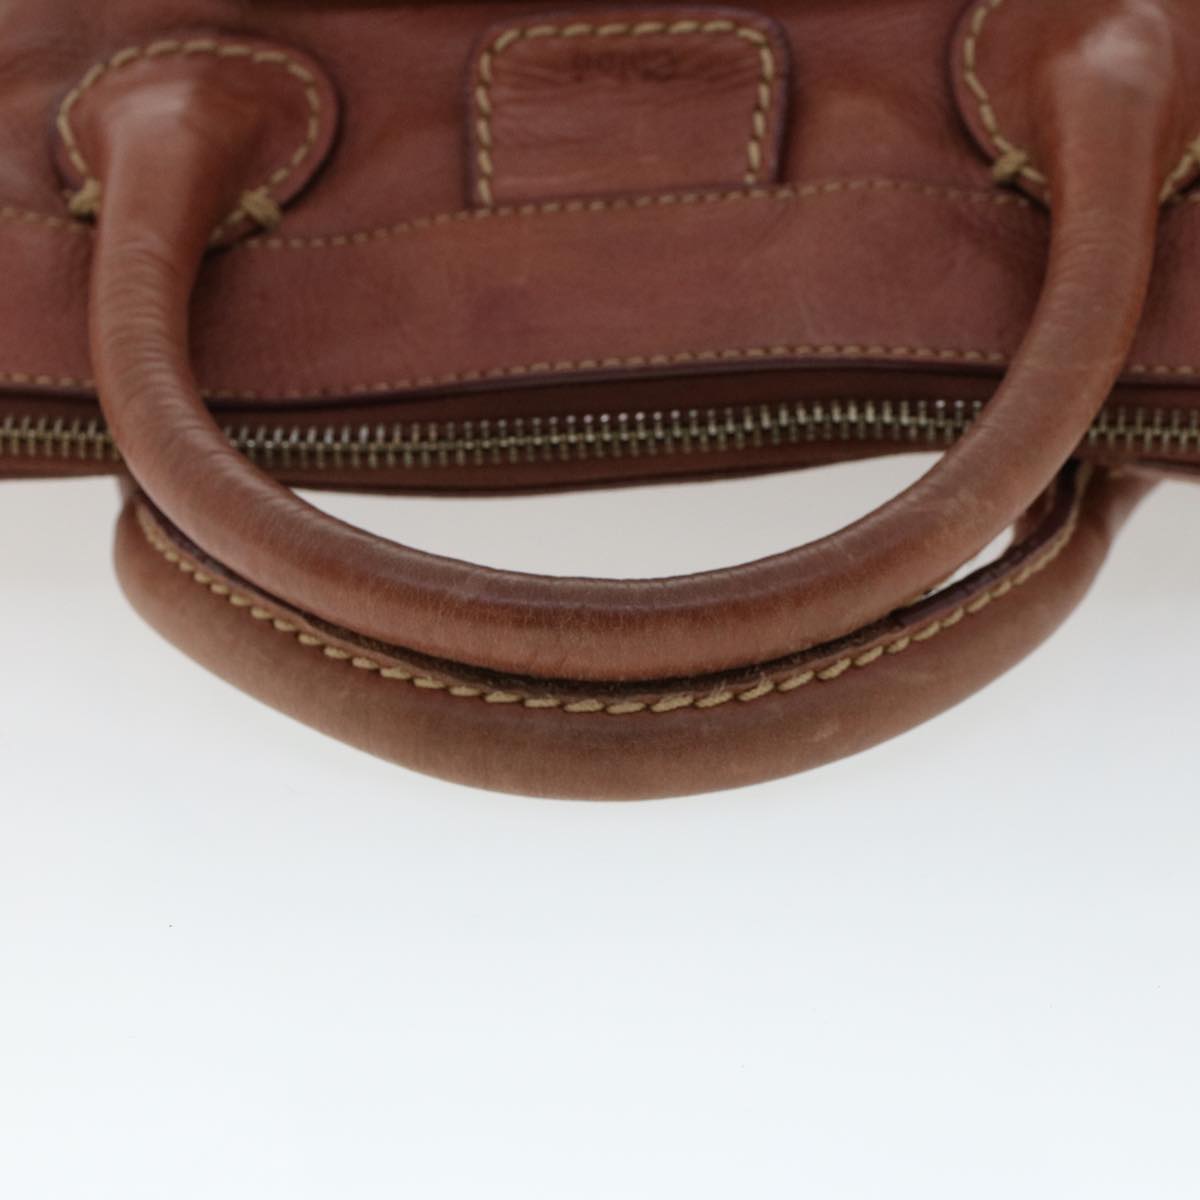 Chloe Hand Bag Leather Brown 02-05-53 Auth bs6748